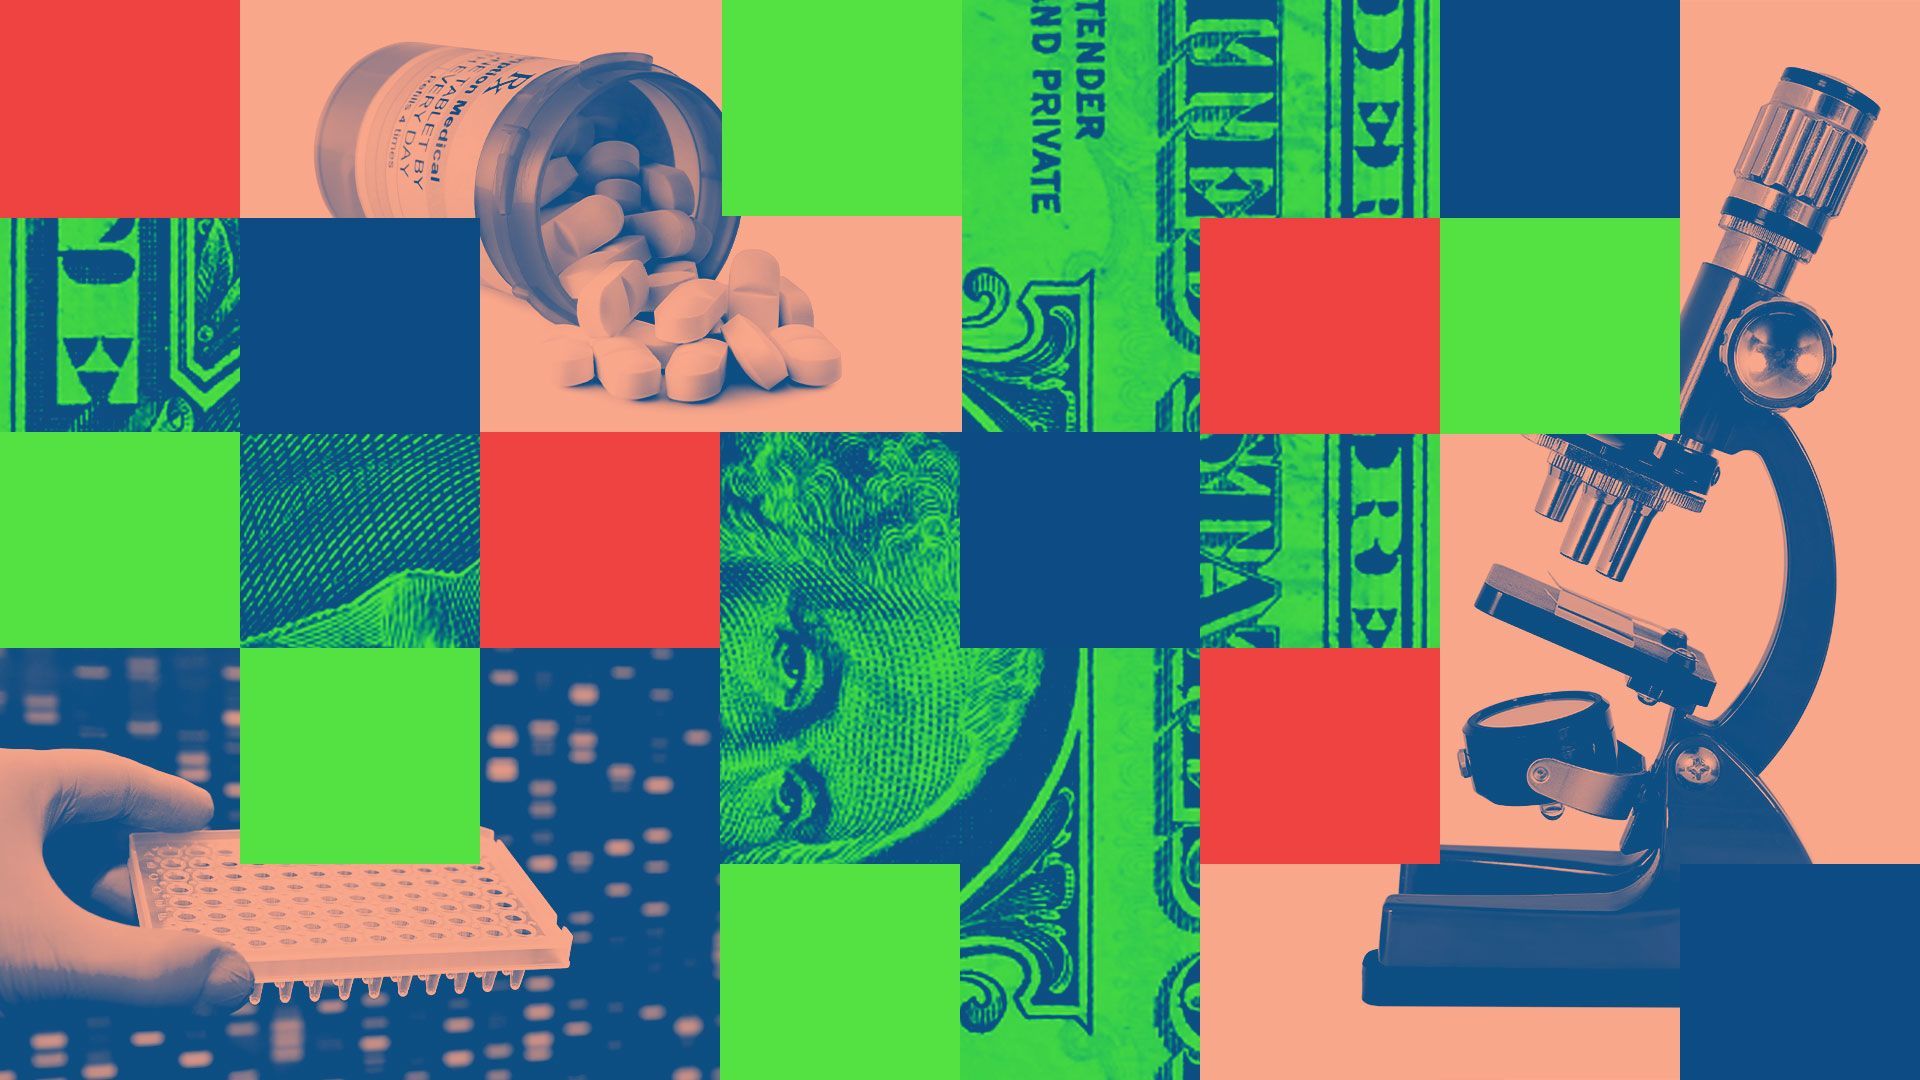 Illustration of a grid consisting of colorful rectangles, the back of a one hundred dollar bill, and photographs of a prescription pill bottle, a microscope, and a hand holding a molecular genetics testing tray.